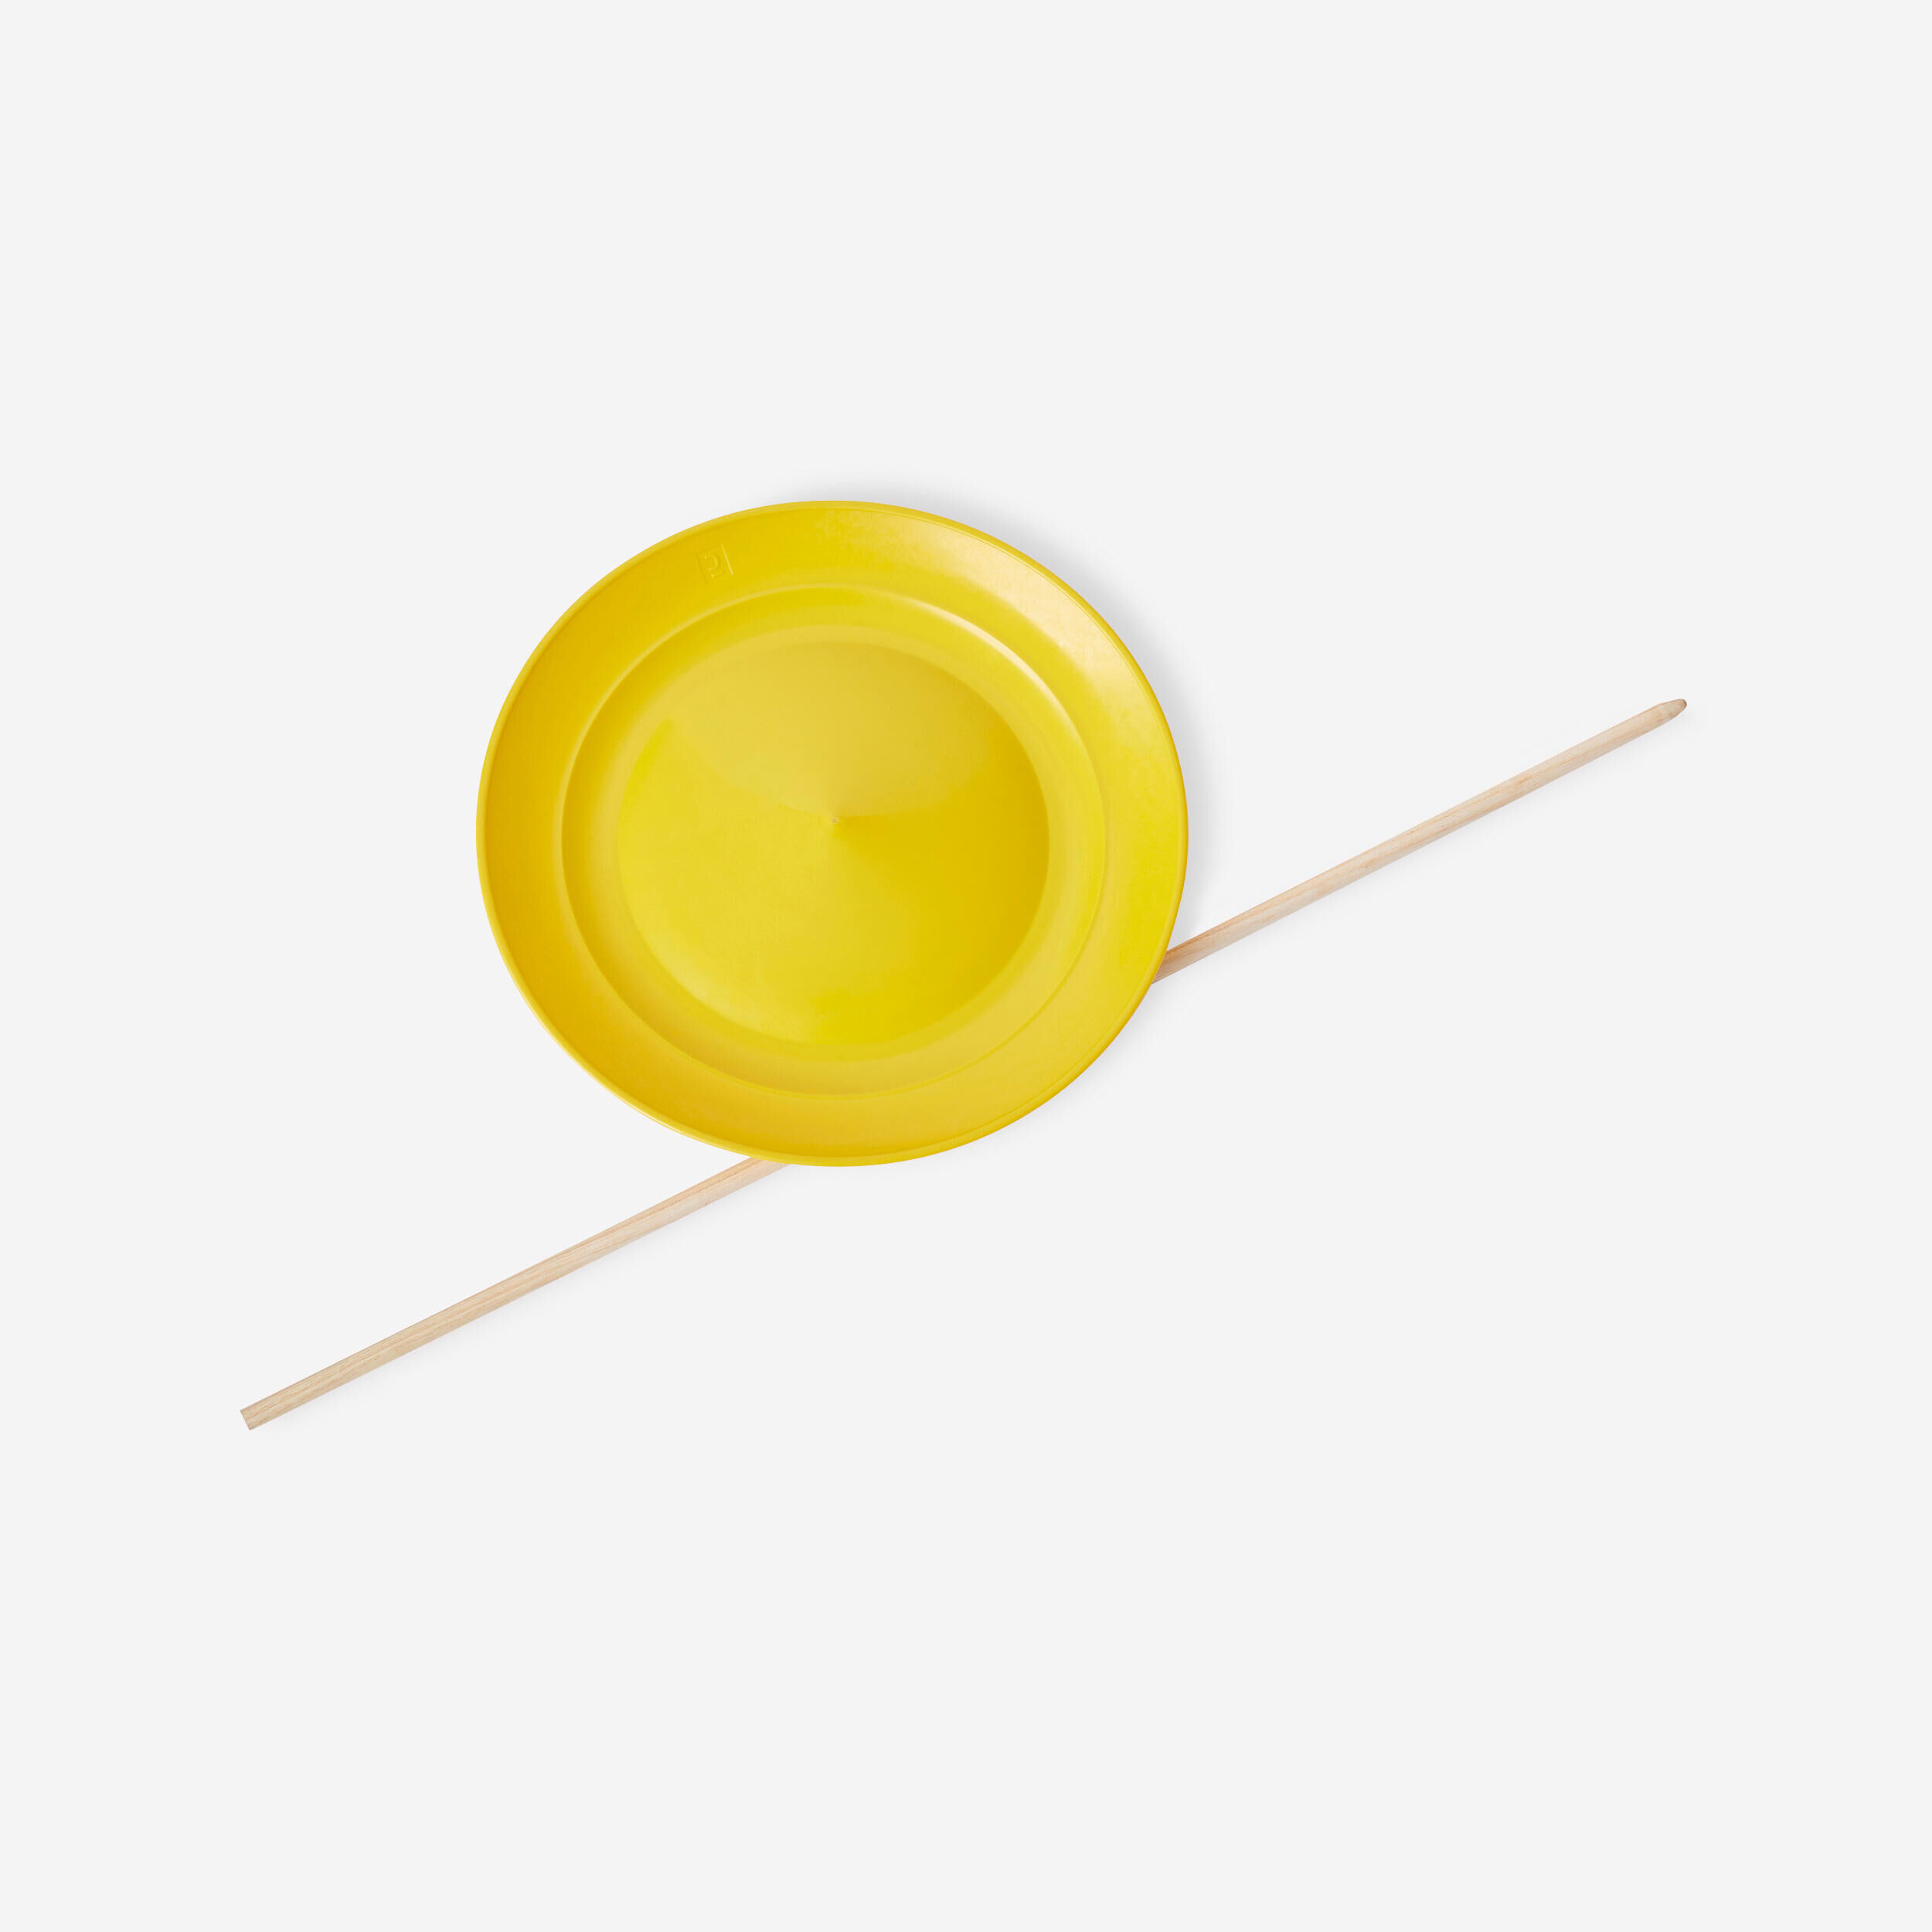 DOMYOS Spinning Plate + Wooden Stick - Yellow